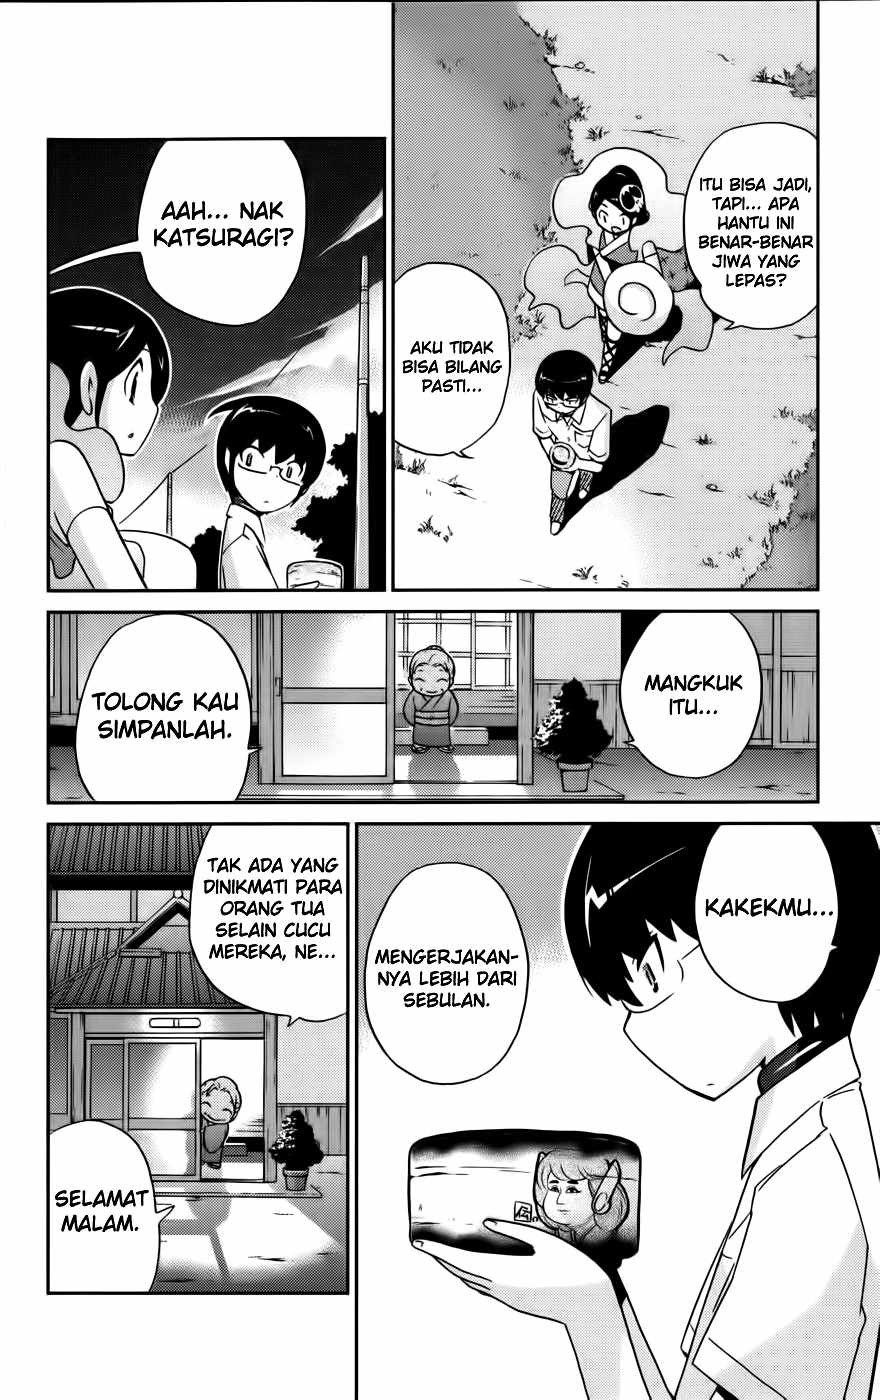 The World God Only Knows Chapter 67